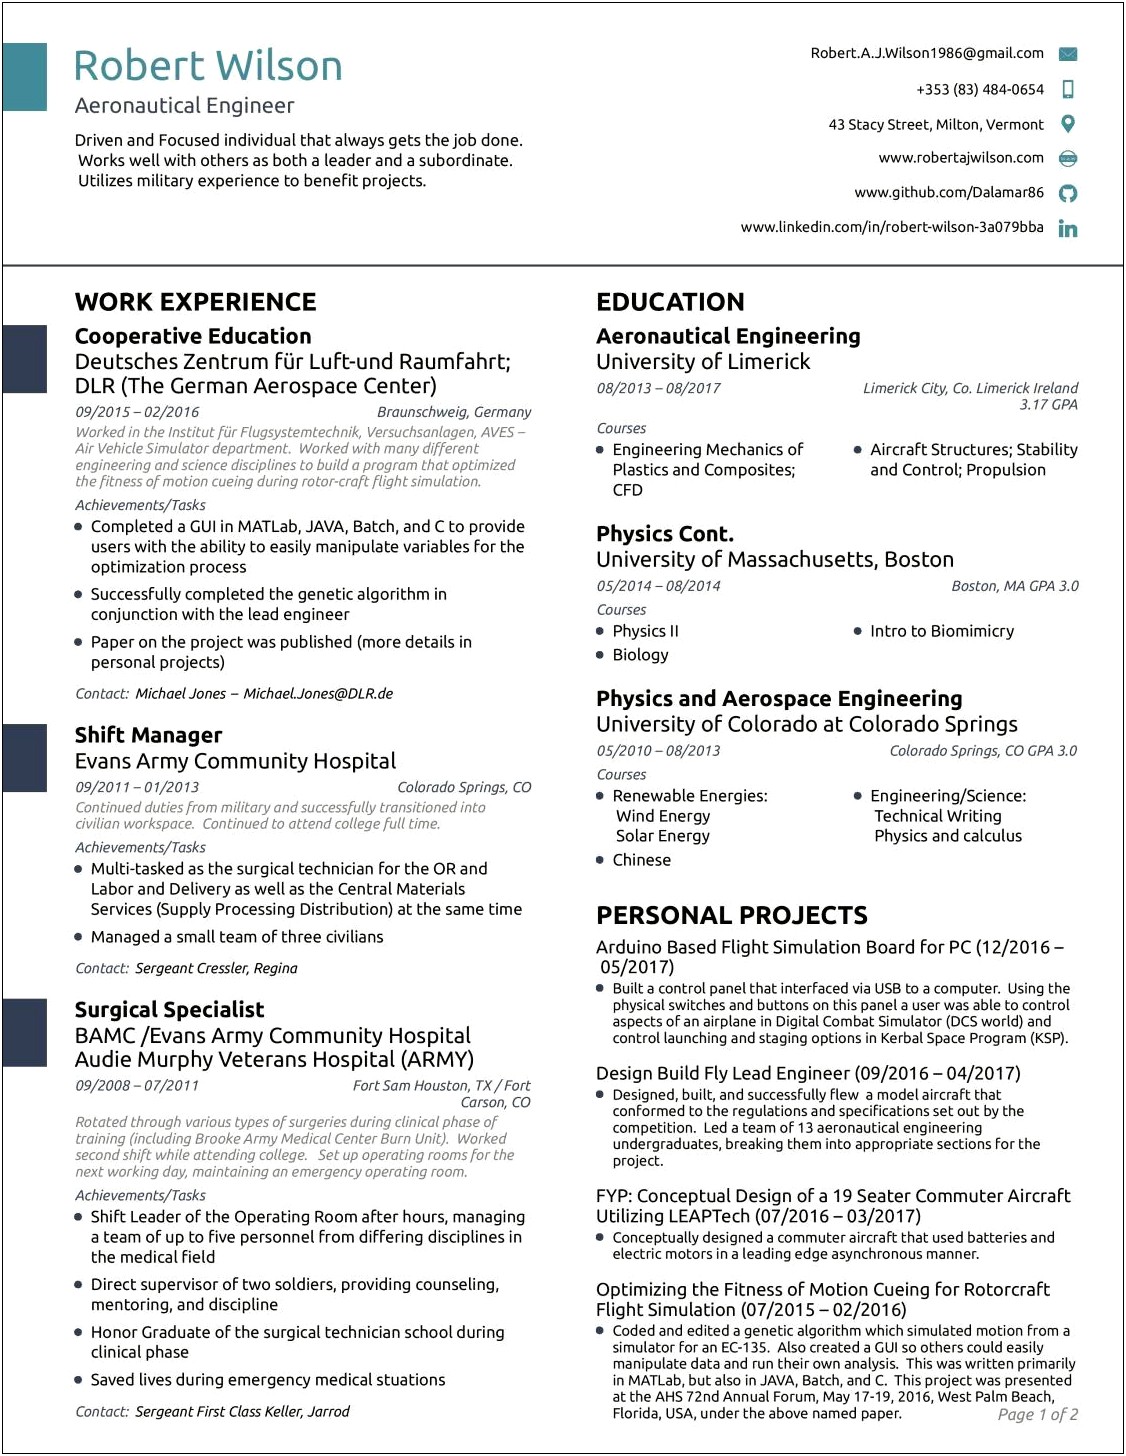 Sample Resume For Dcs Project Engineer